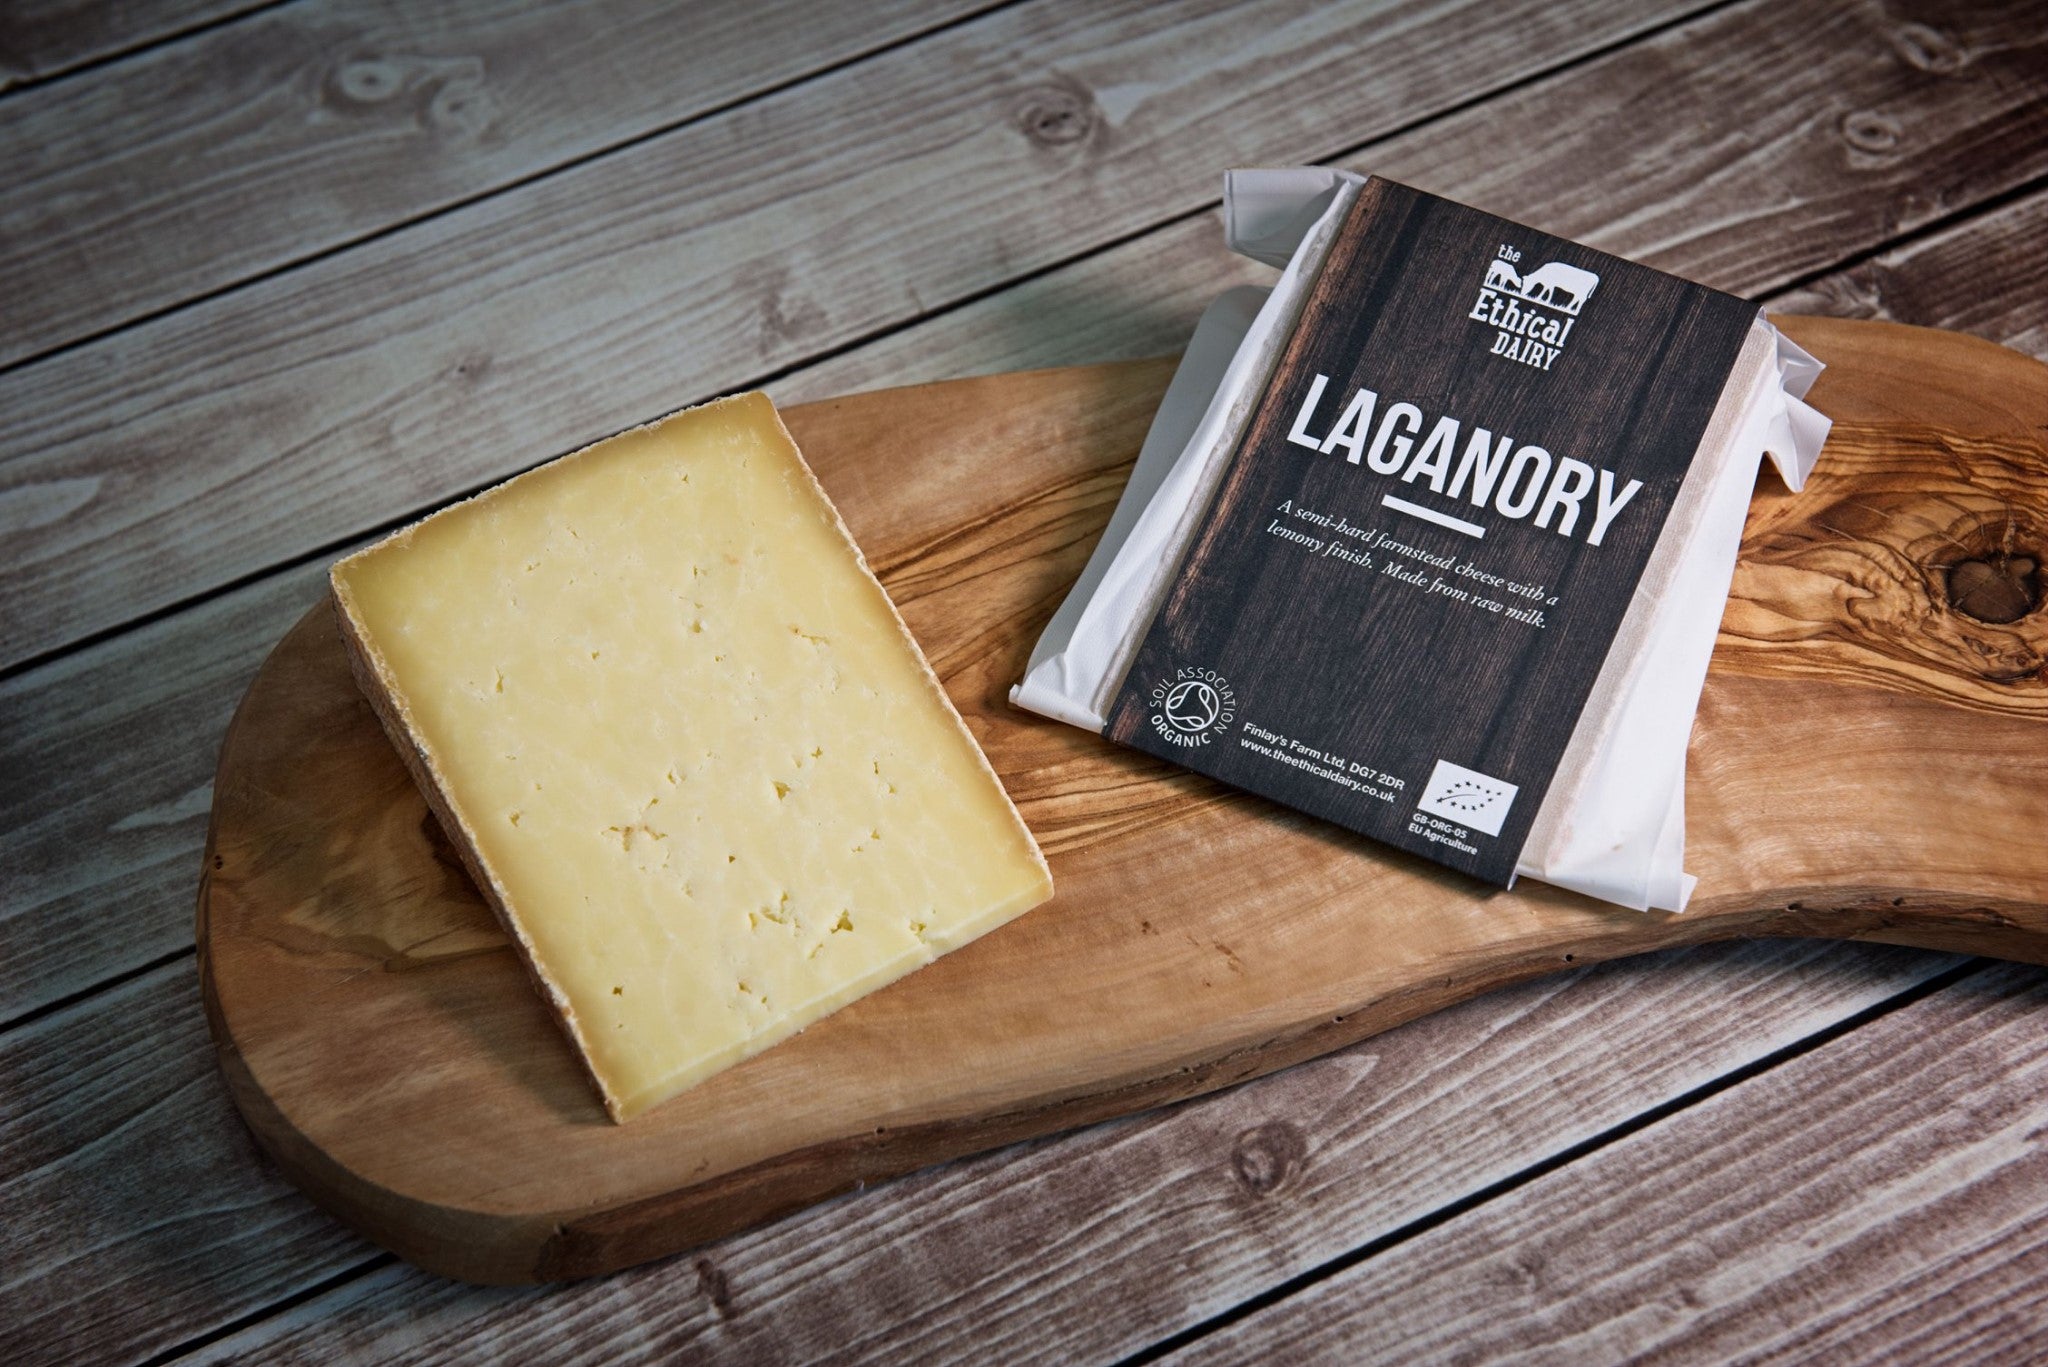 Organic Laganory Unpasteurised Farmhouse Cheese - approx 150g